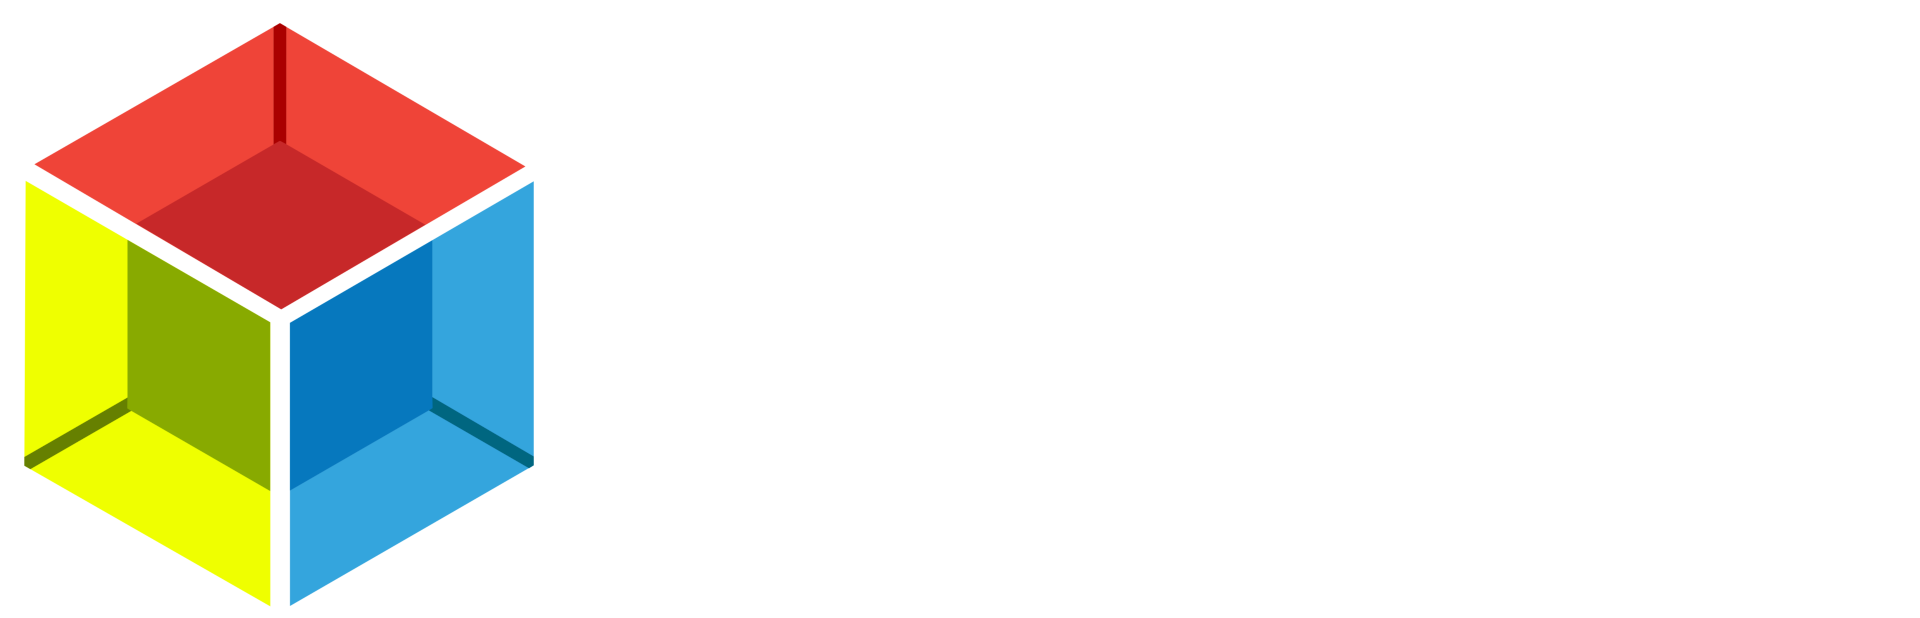 The Make Space